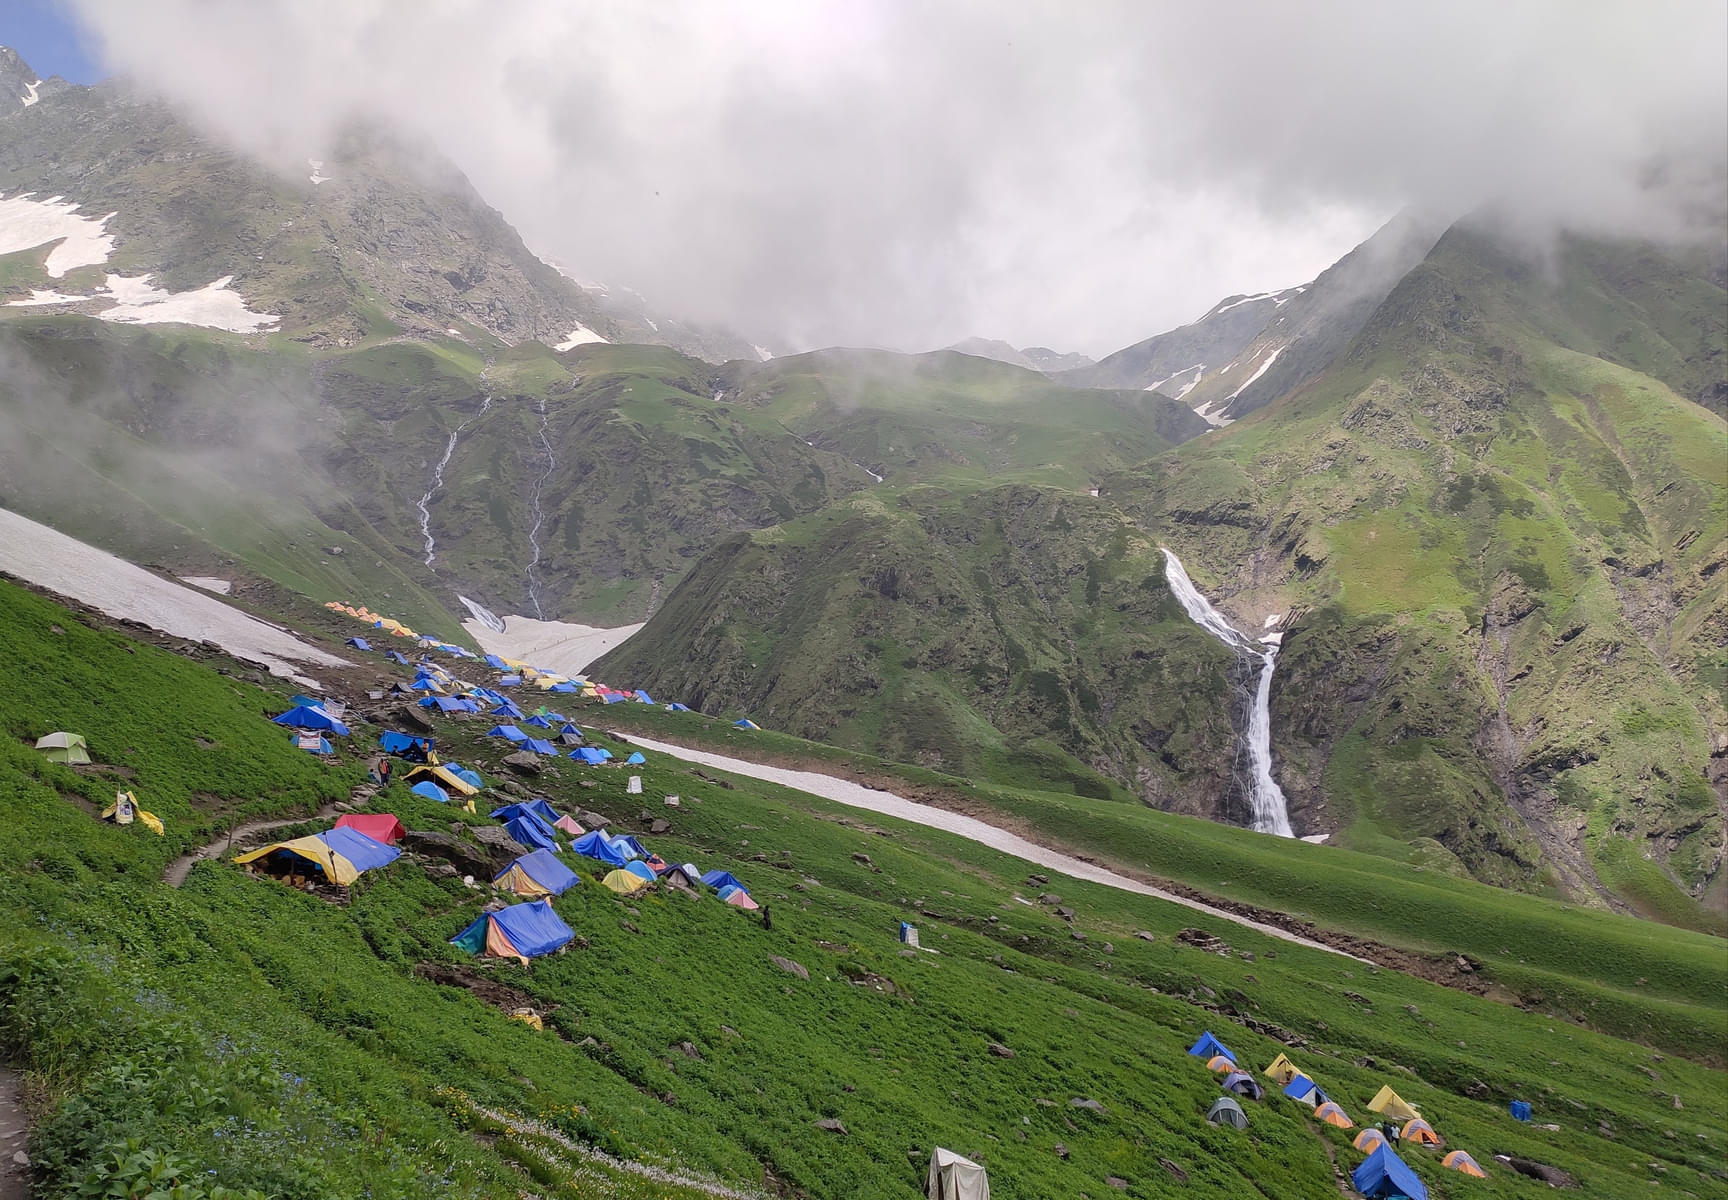 Experience the adventure of camping under the stars, amidst snow-covered valleys